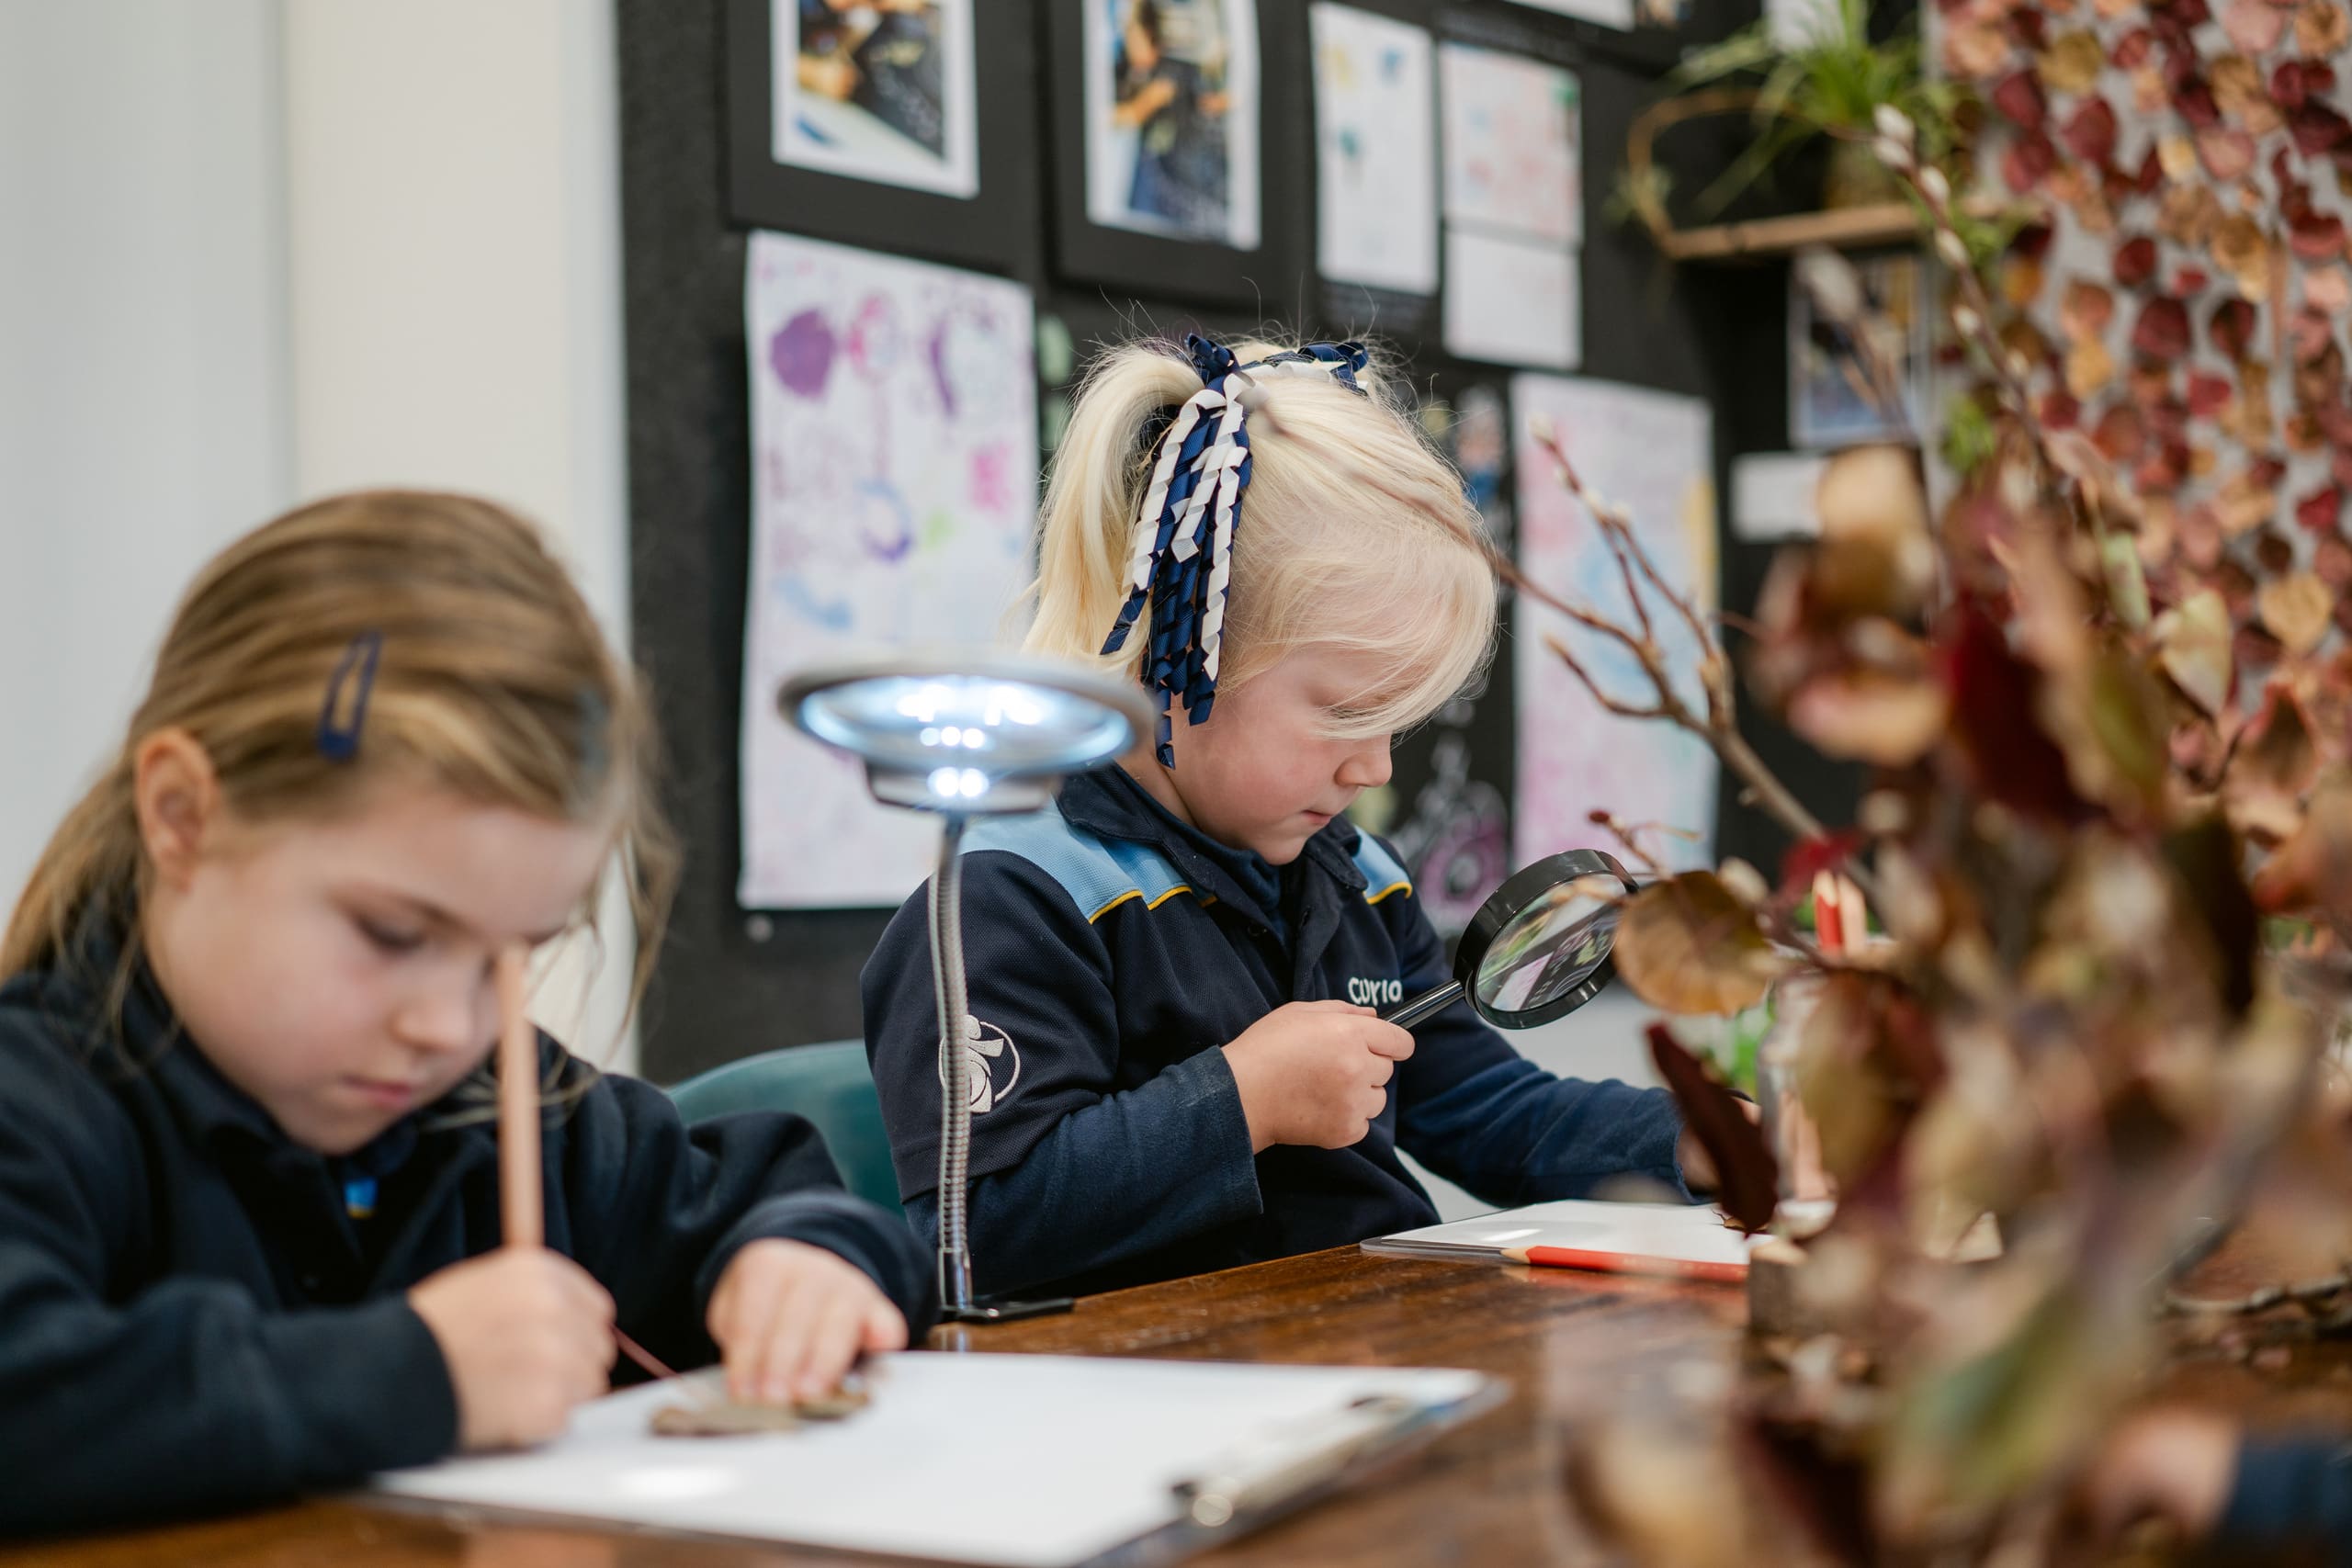 Two young students are sitting at a desk using magnifying glasses to look closely at leaves.